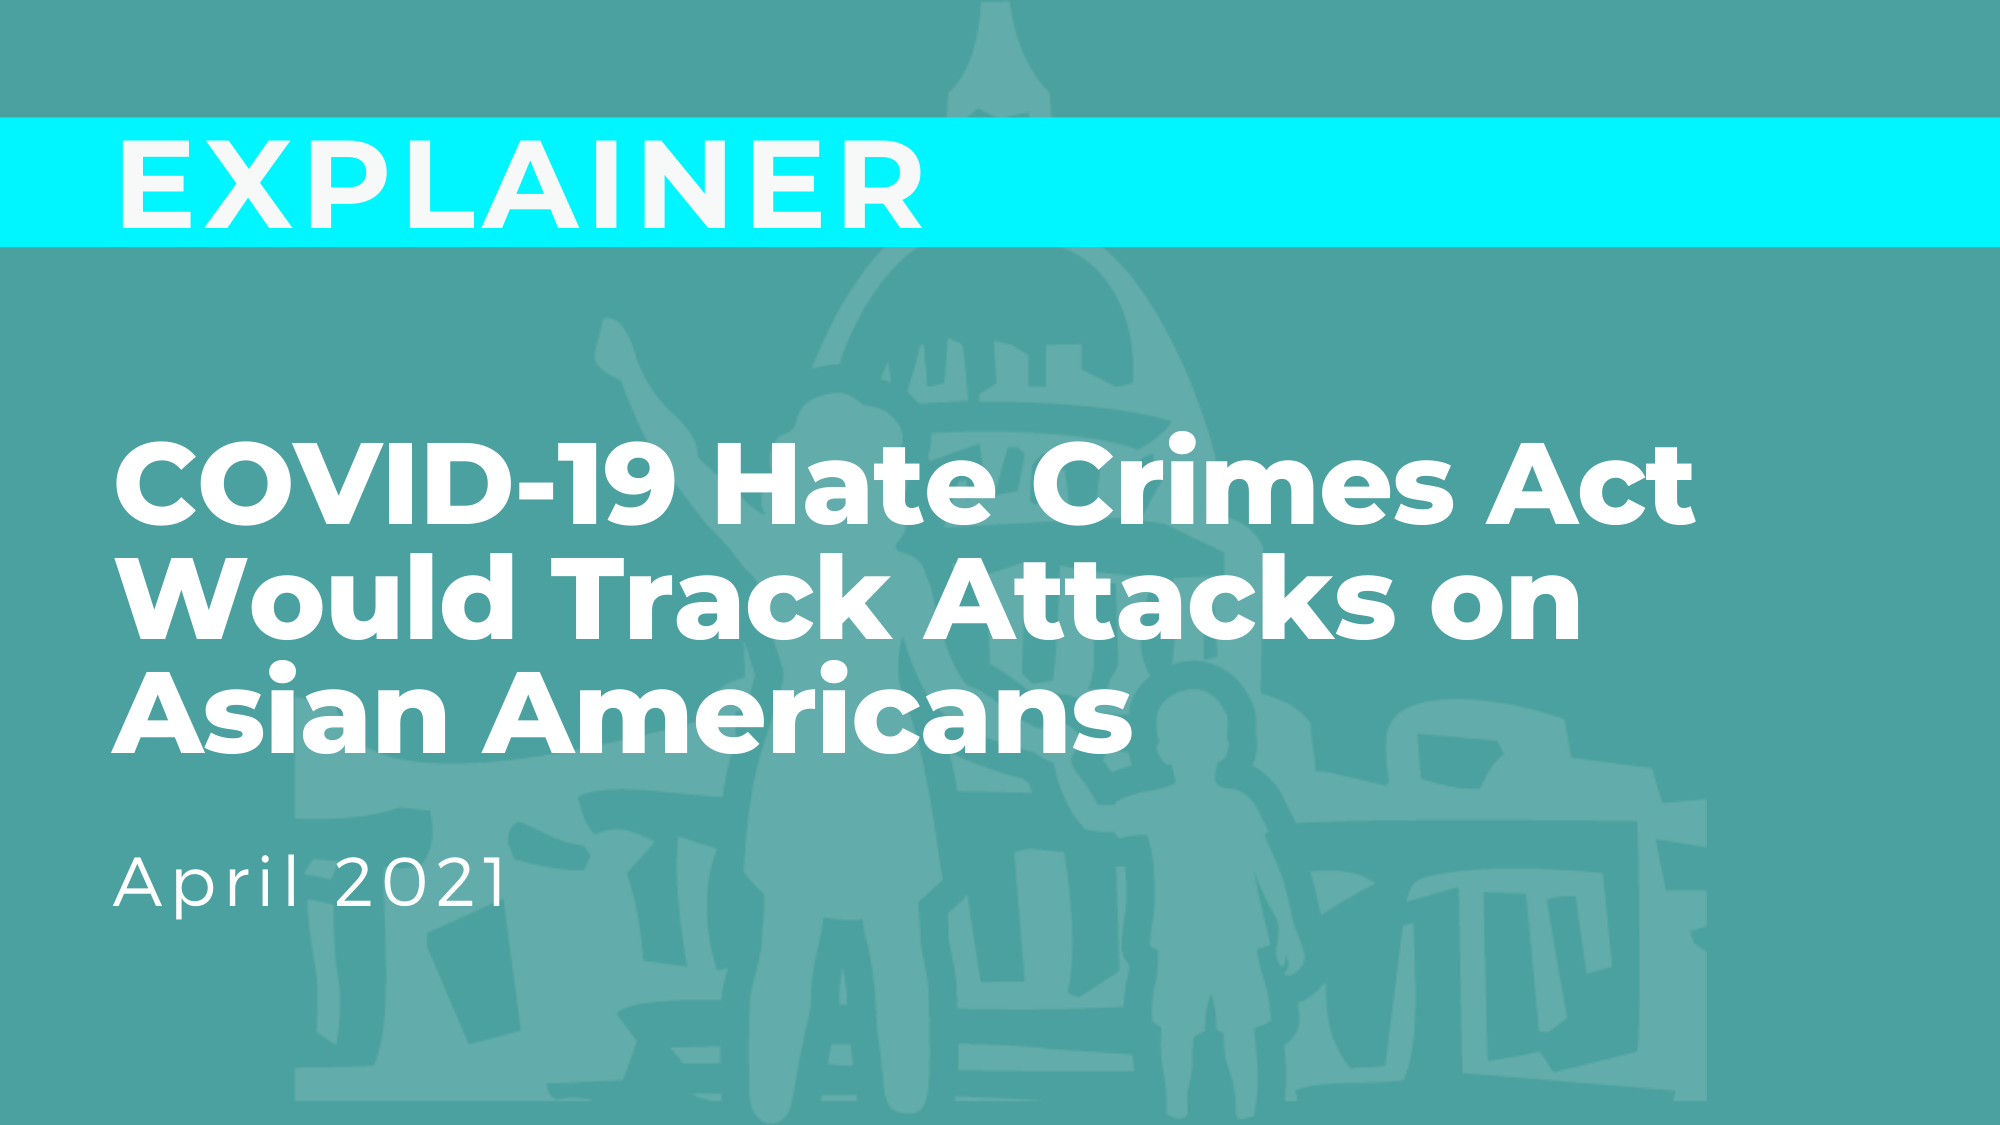 COVID-19 Hate Crimes Act Would Track Attacks on Asian Americans